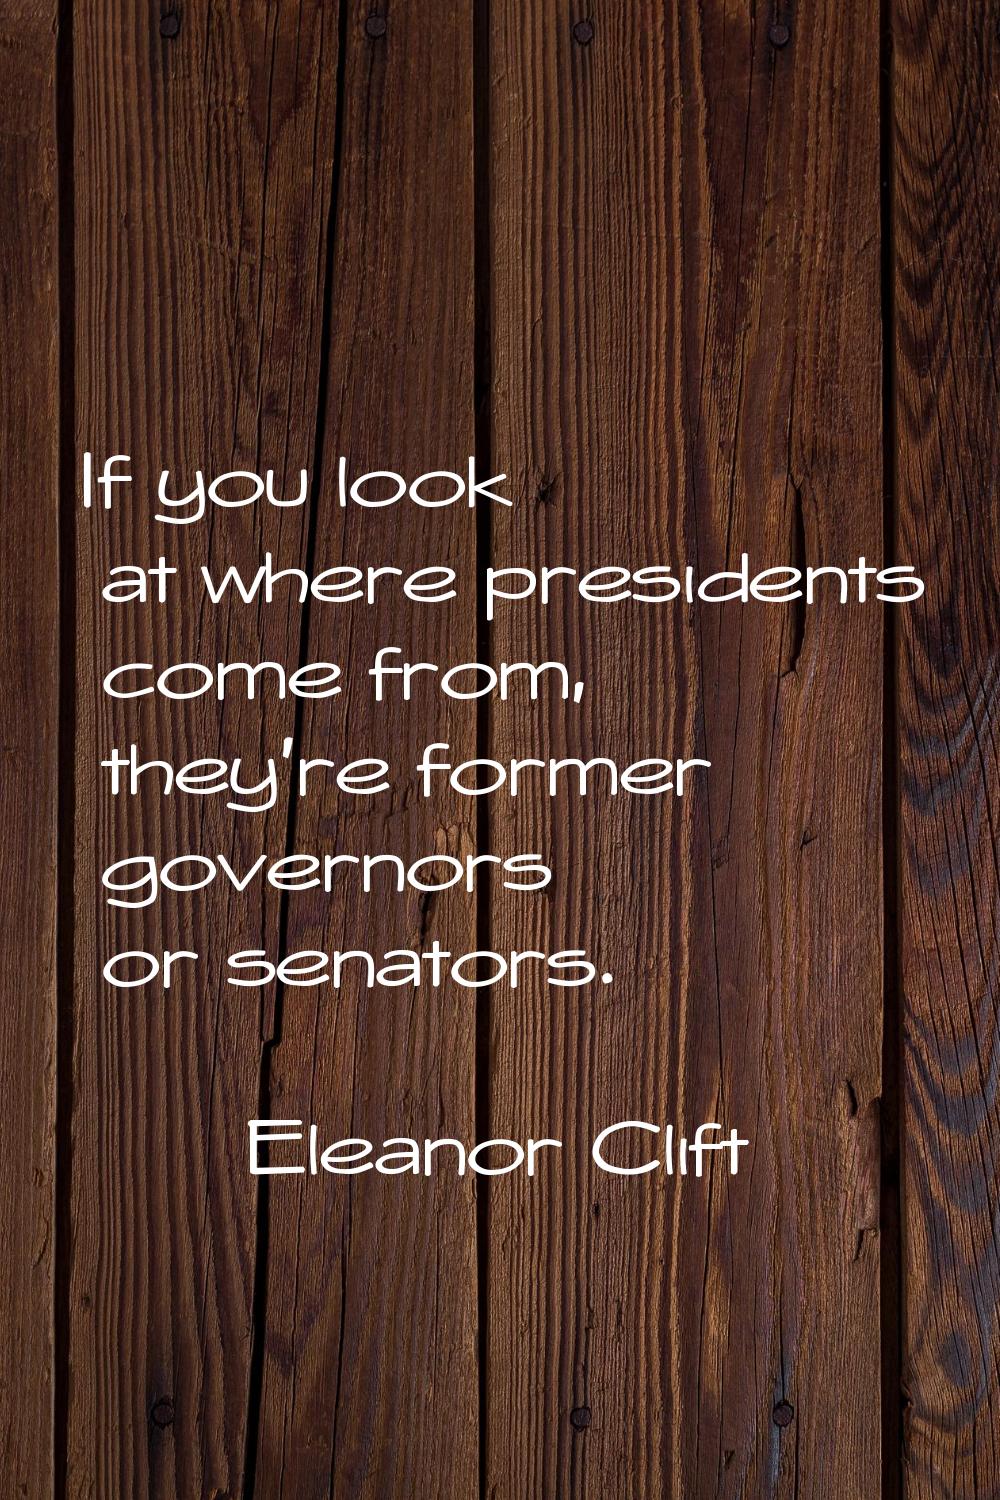 If you look at where presidents come from, they're former governors or senators.